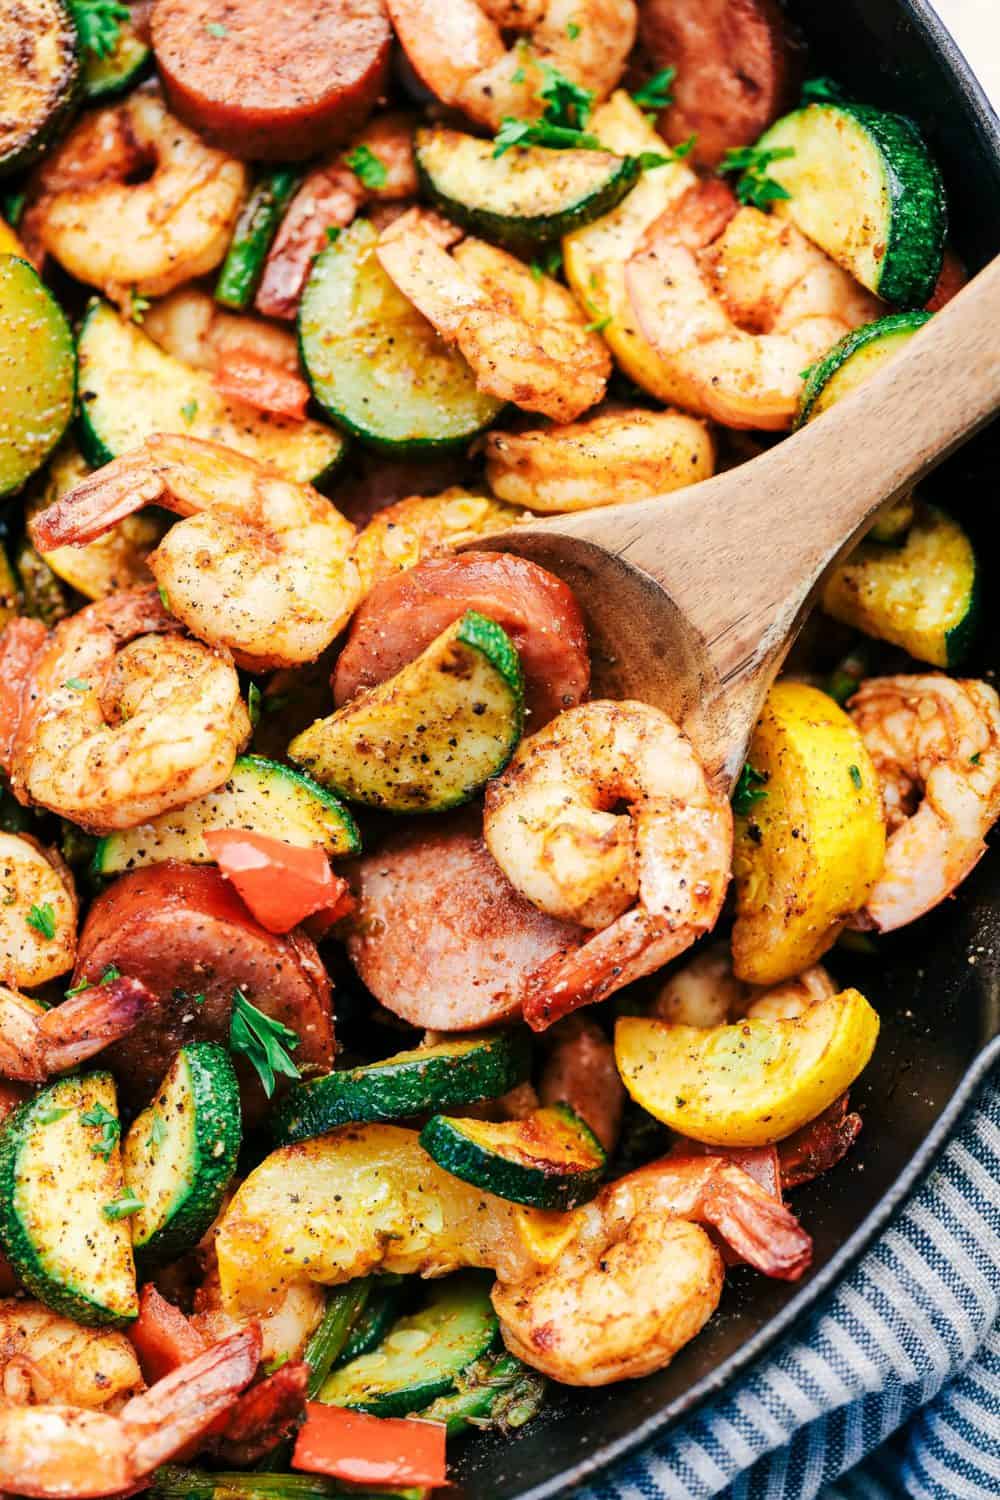 Cajun Shrimp and Sausage Vegetable Skillet with wooden spoon